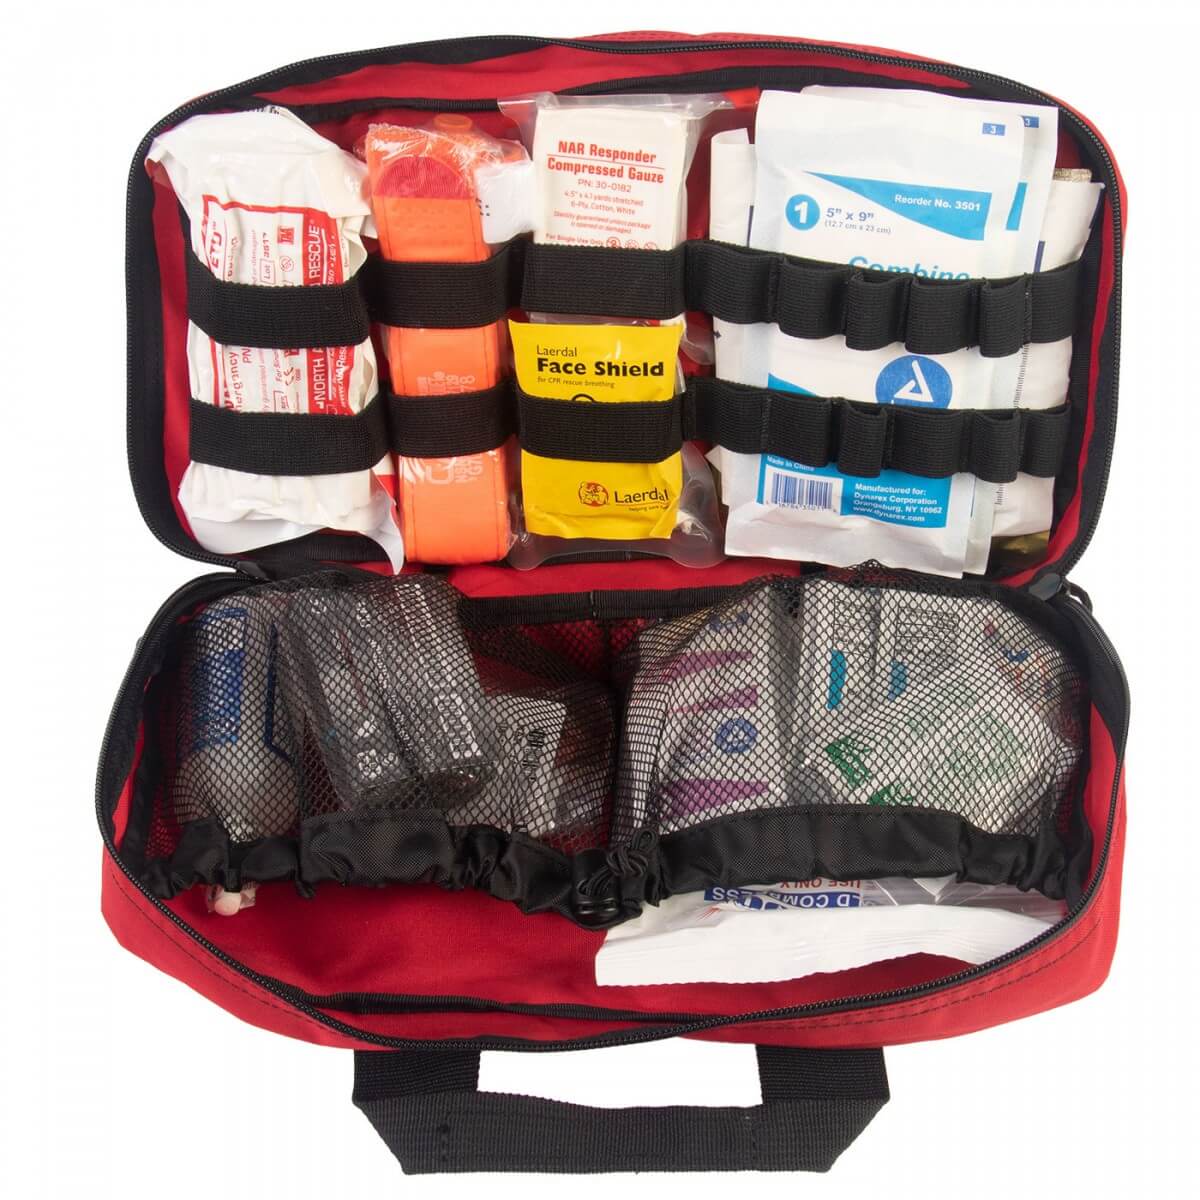 Most First aid kits do not carry tourniquets or other bleeding control equipment, but ours does.